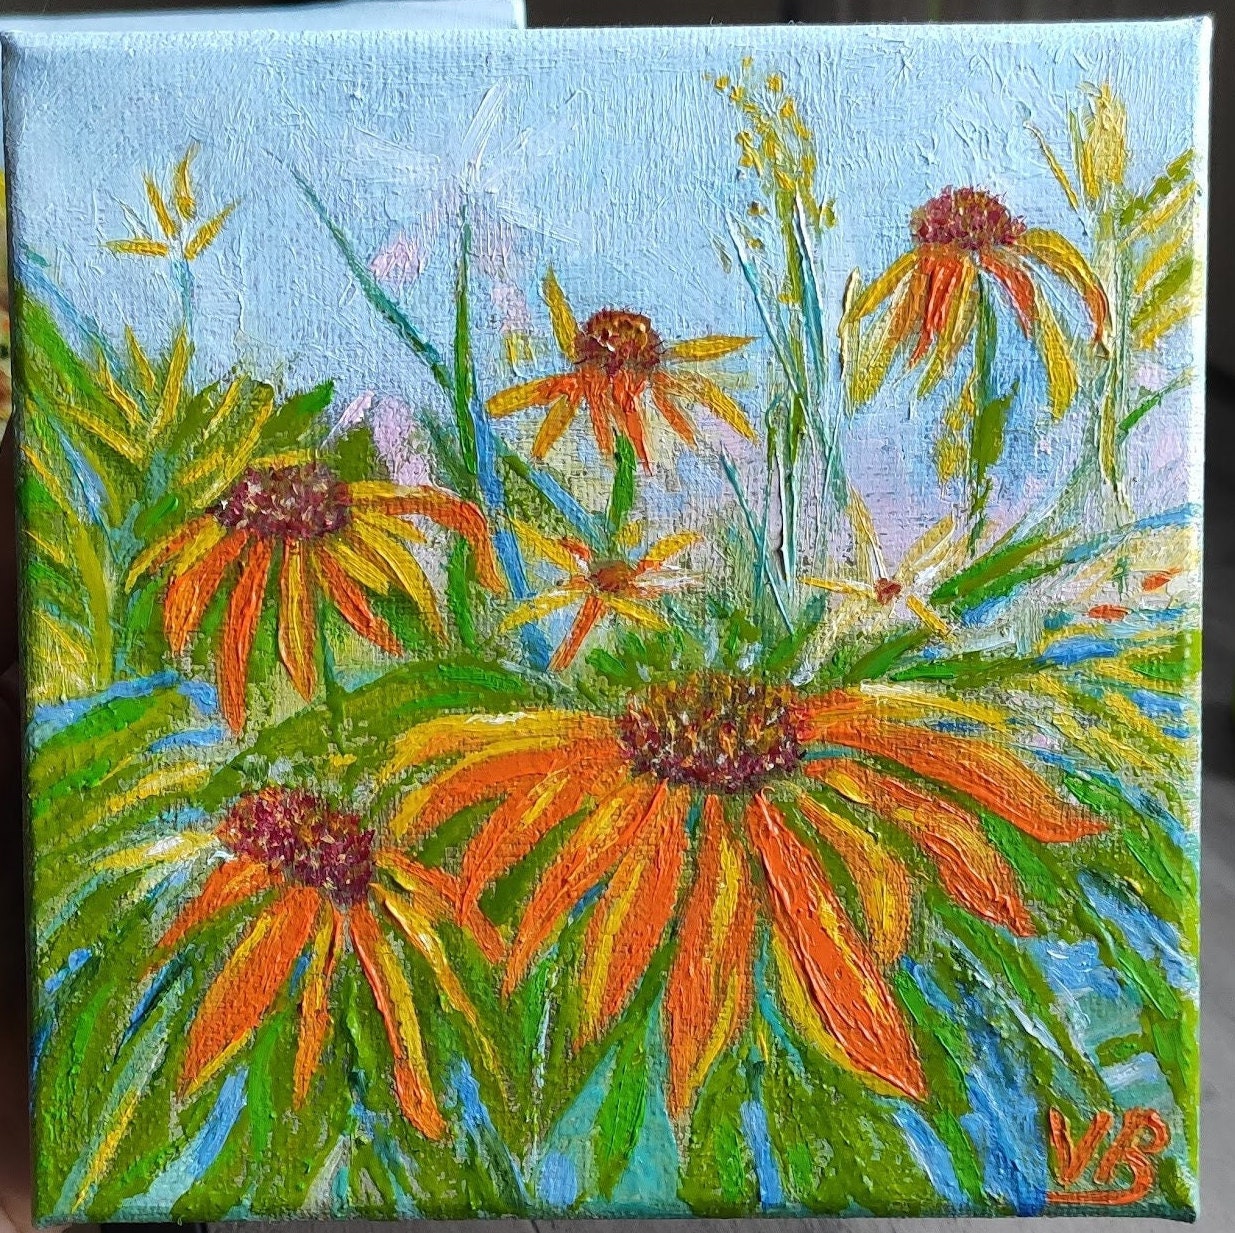 Gallery Wall Art Still Life Original Oil Art Painting on Canvas Floral Painting Daisy Painting